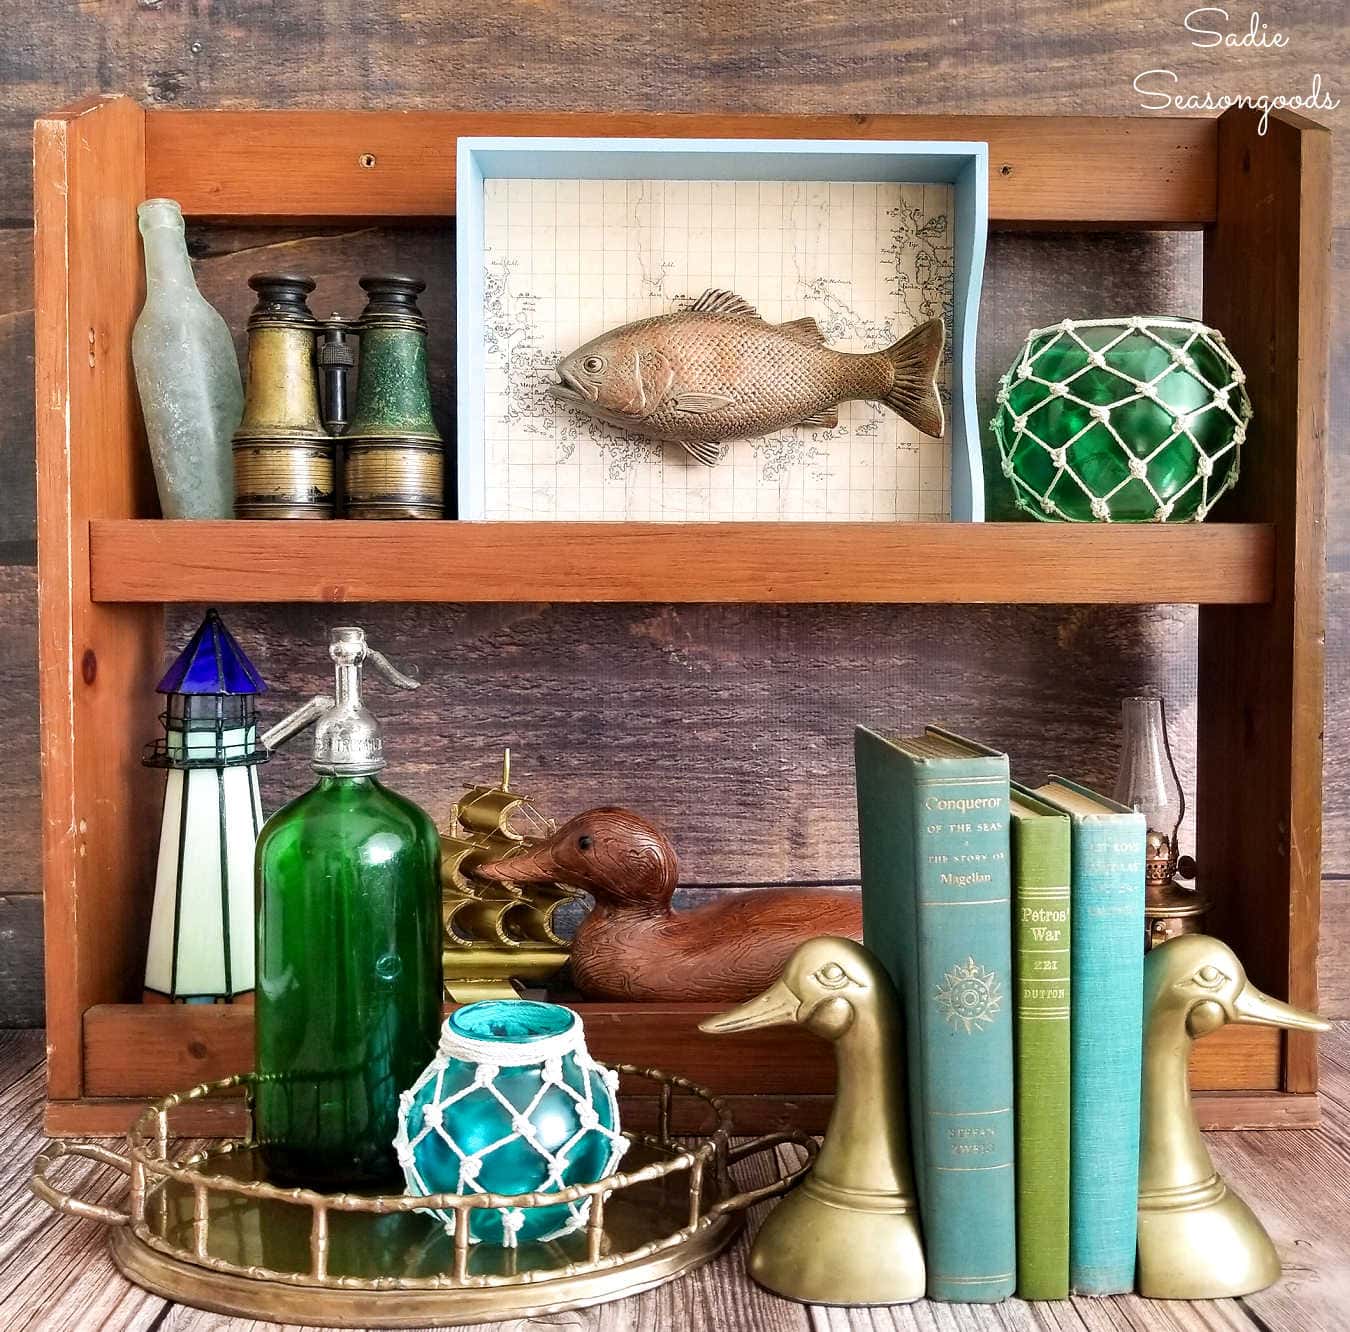 Vintage-Style Lovers Will Adore This New Issue - Cottage Journal  Sewing  room inspiration, Sewing room design, Vintage cottage decor